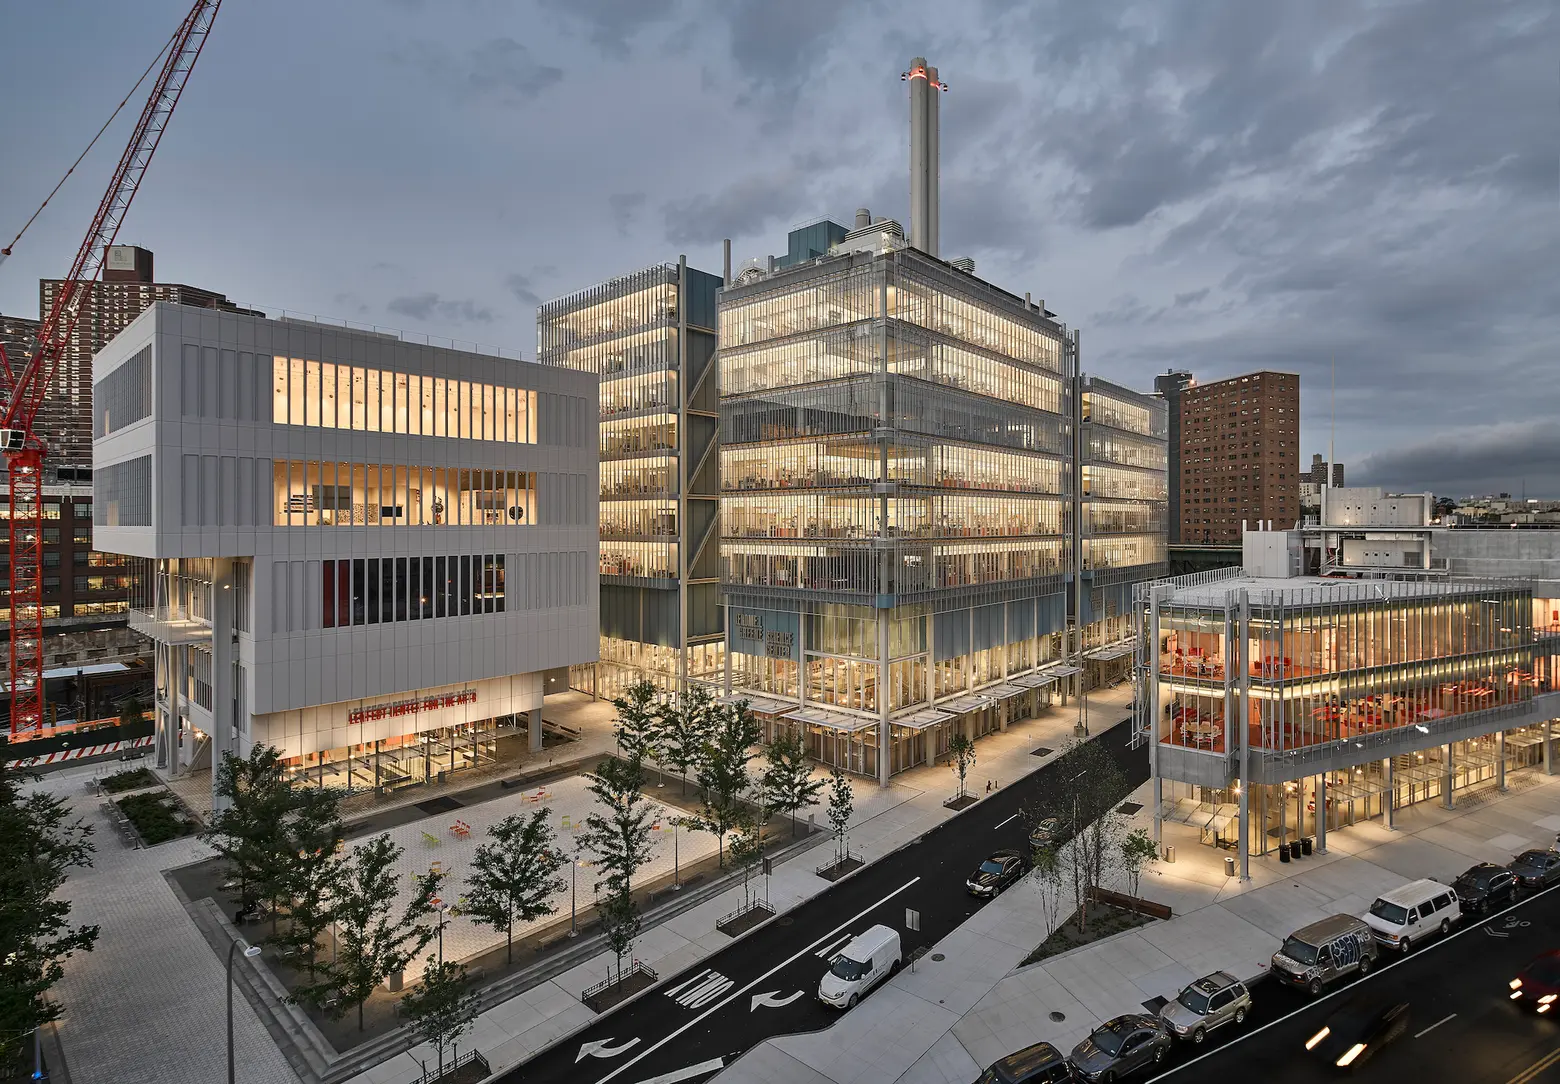 Renzo Piano unveils his third and final building at Columbia’s Manhattanville Campus